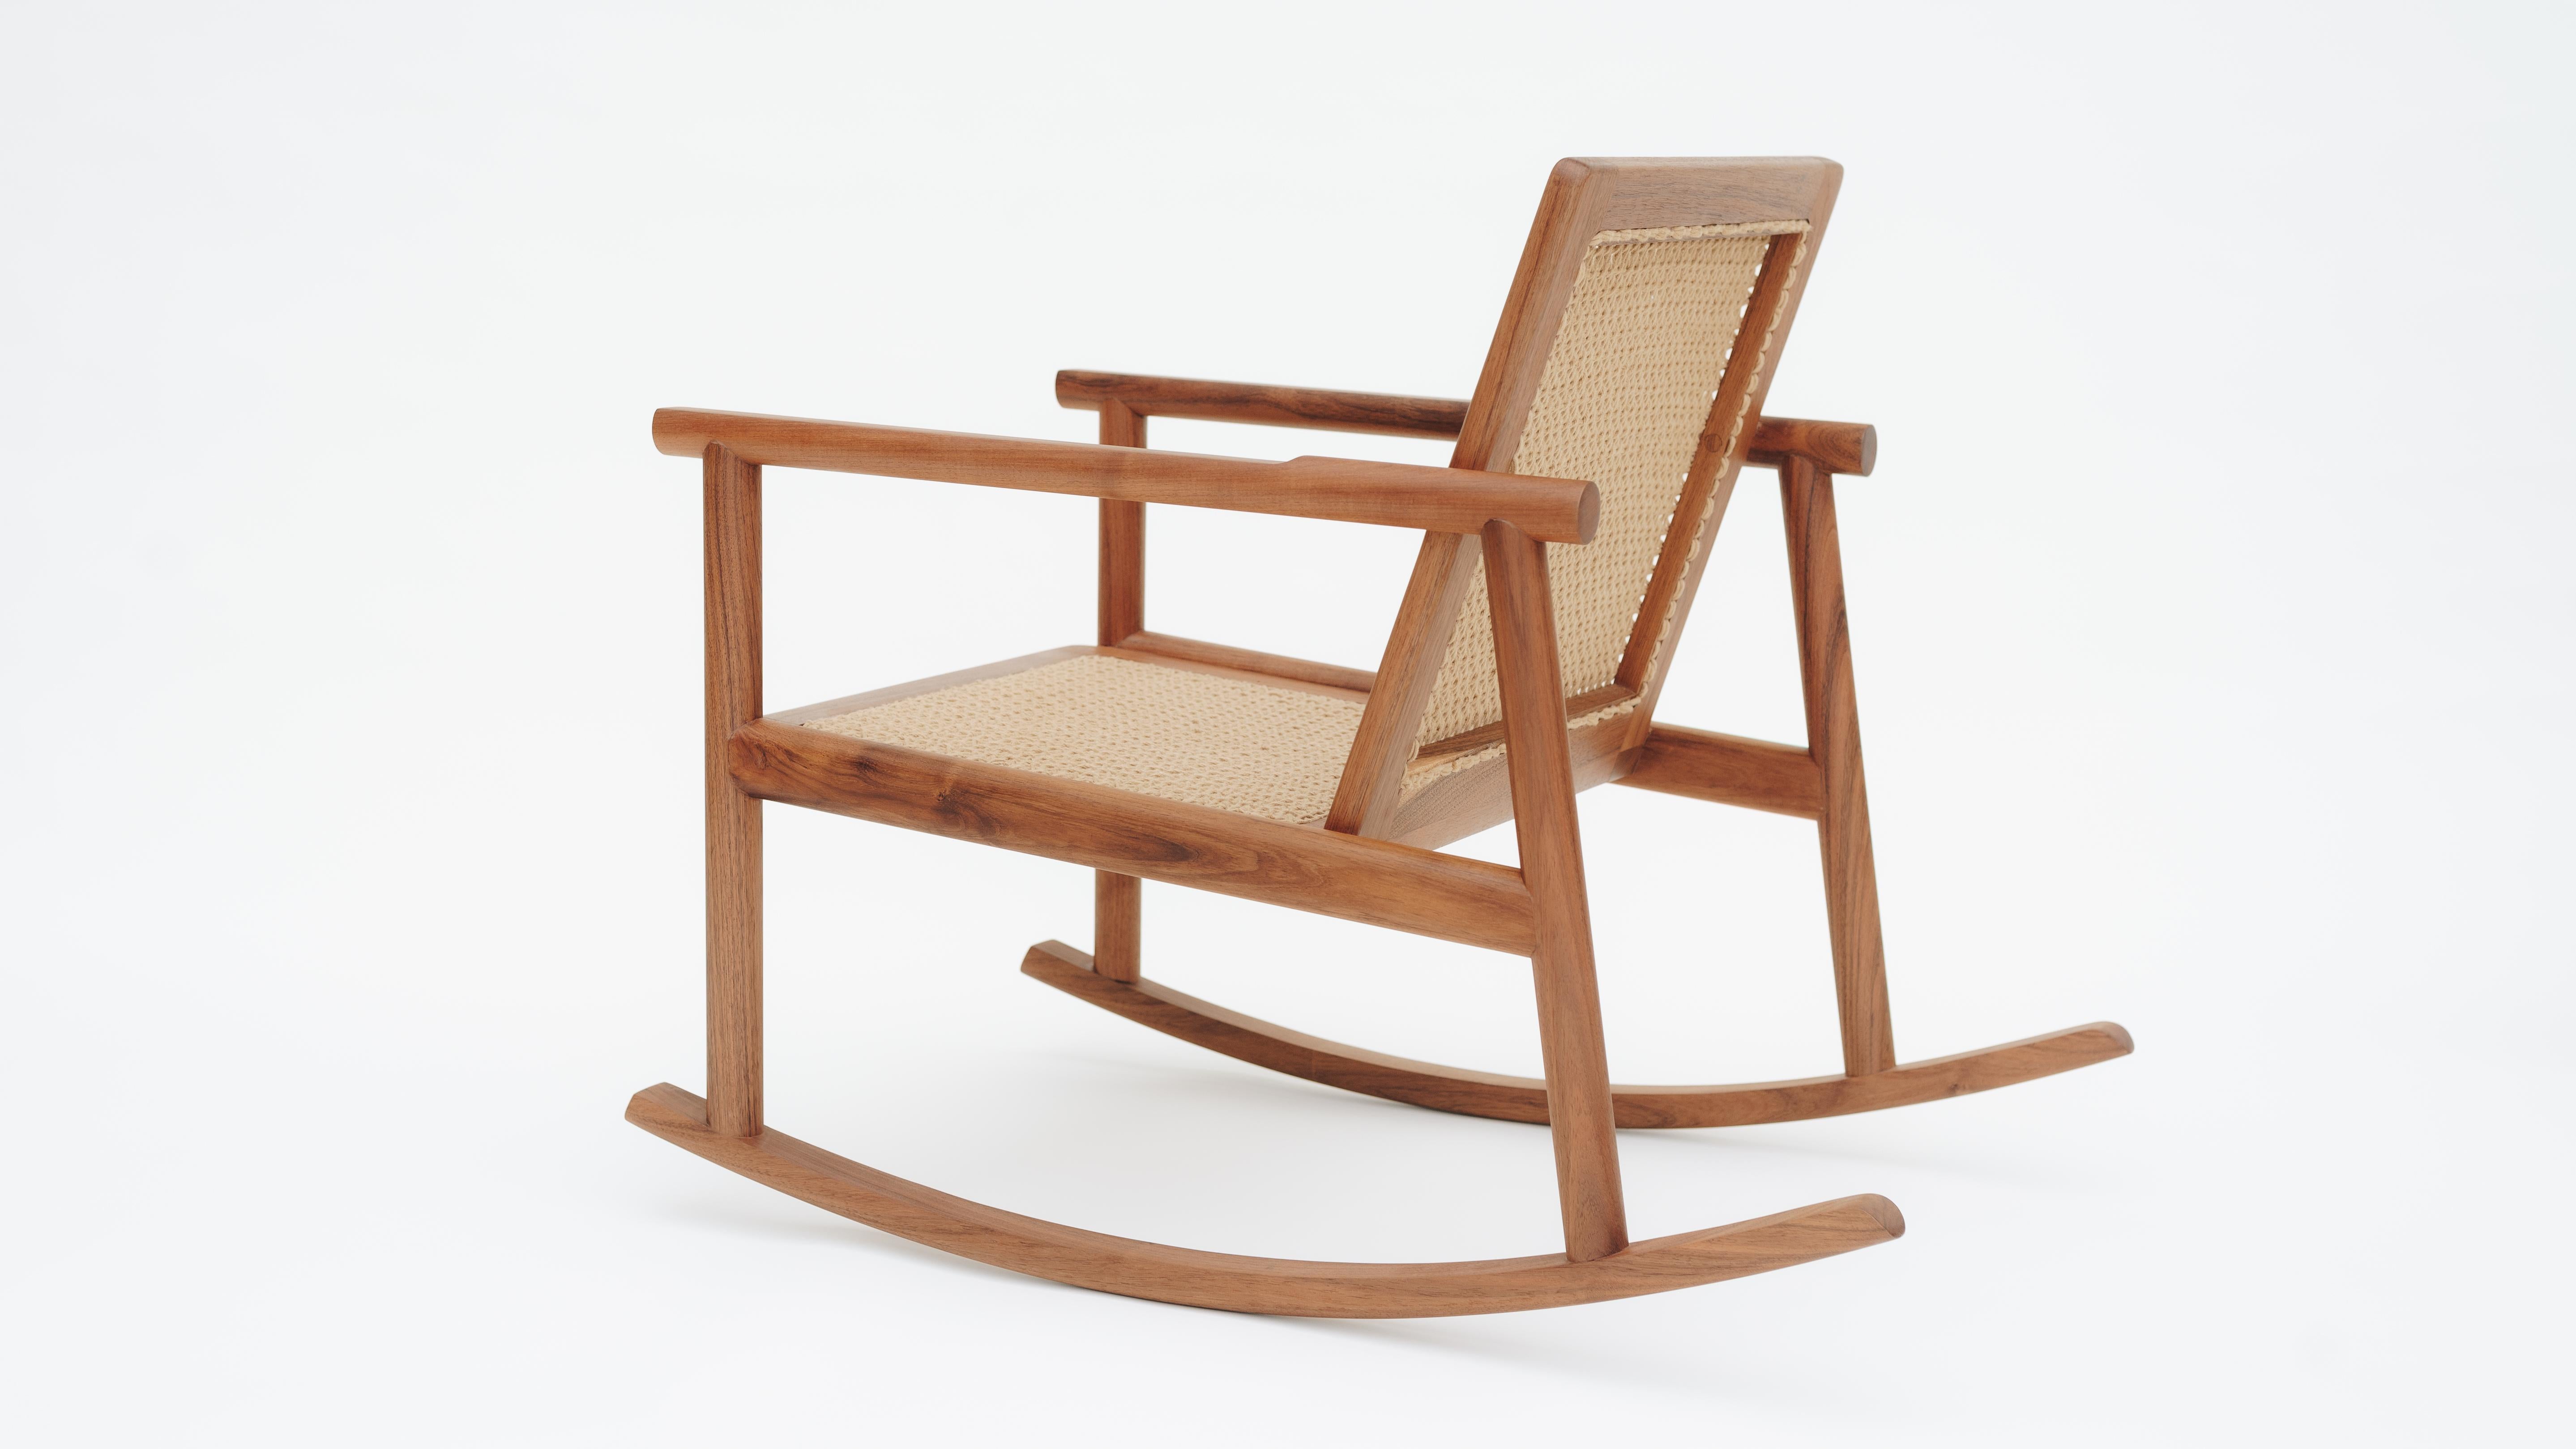 The design of Cocom rocking chair draws its inspiration from the wicker rockers and armchairs traditionally woven in Yucatan. Nowadays, this tradition is fading away, along with the art of hand-weaving chairs. That's why the intention behind the